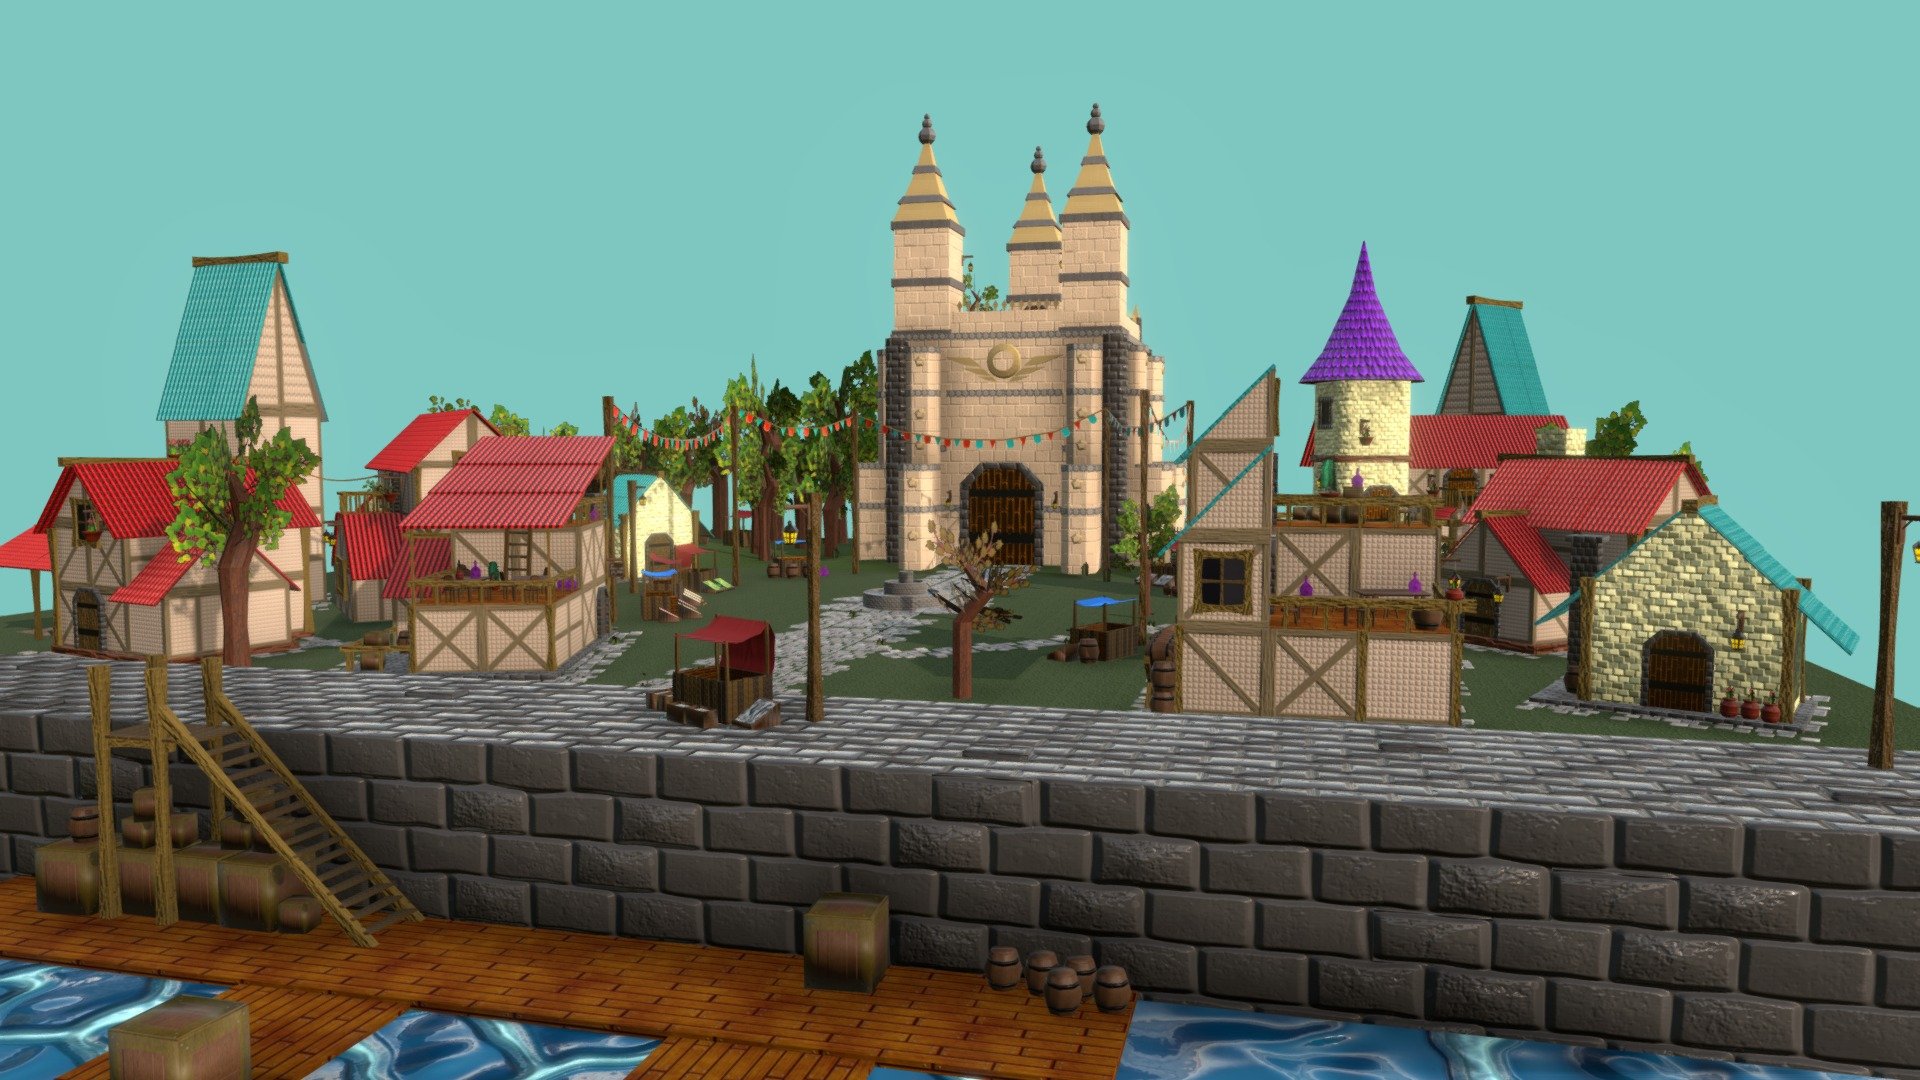 An enviroment i made for practising modular enviroment making.
Based in classic medieval fantasy settings and classic german architecture (among other things).
:D - Stylized Modular Medieval Town (Enviroment) - 3D model by NigroArt 3d model